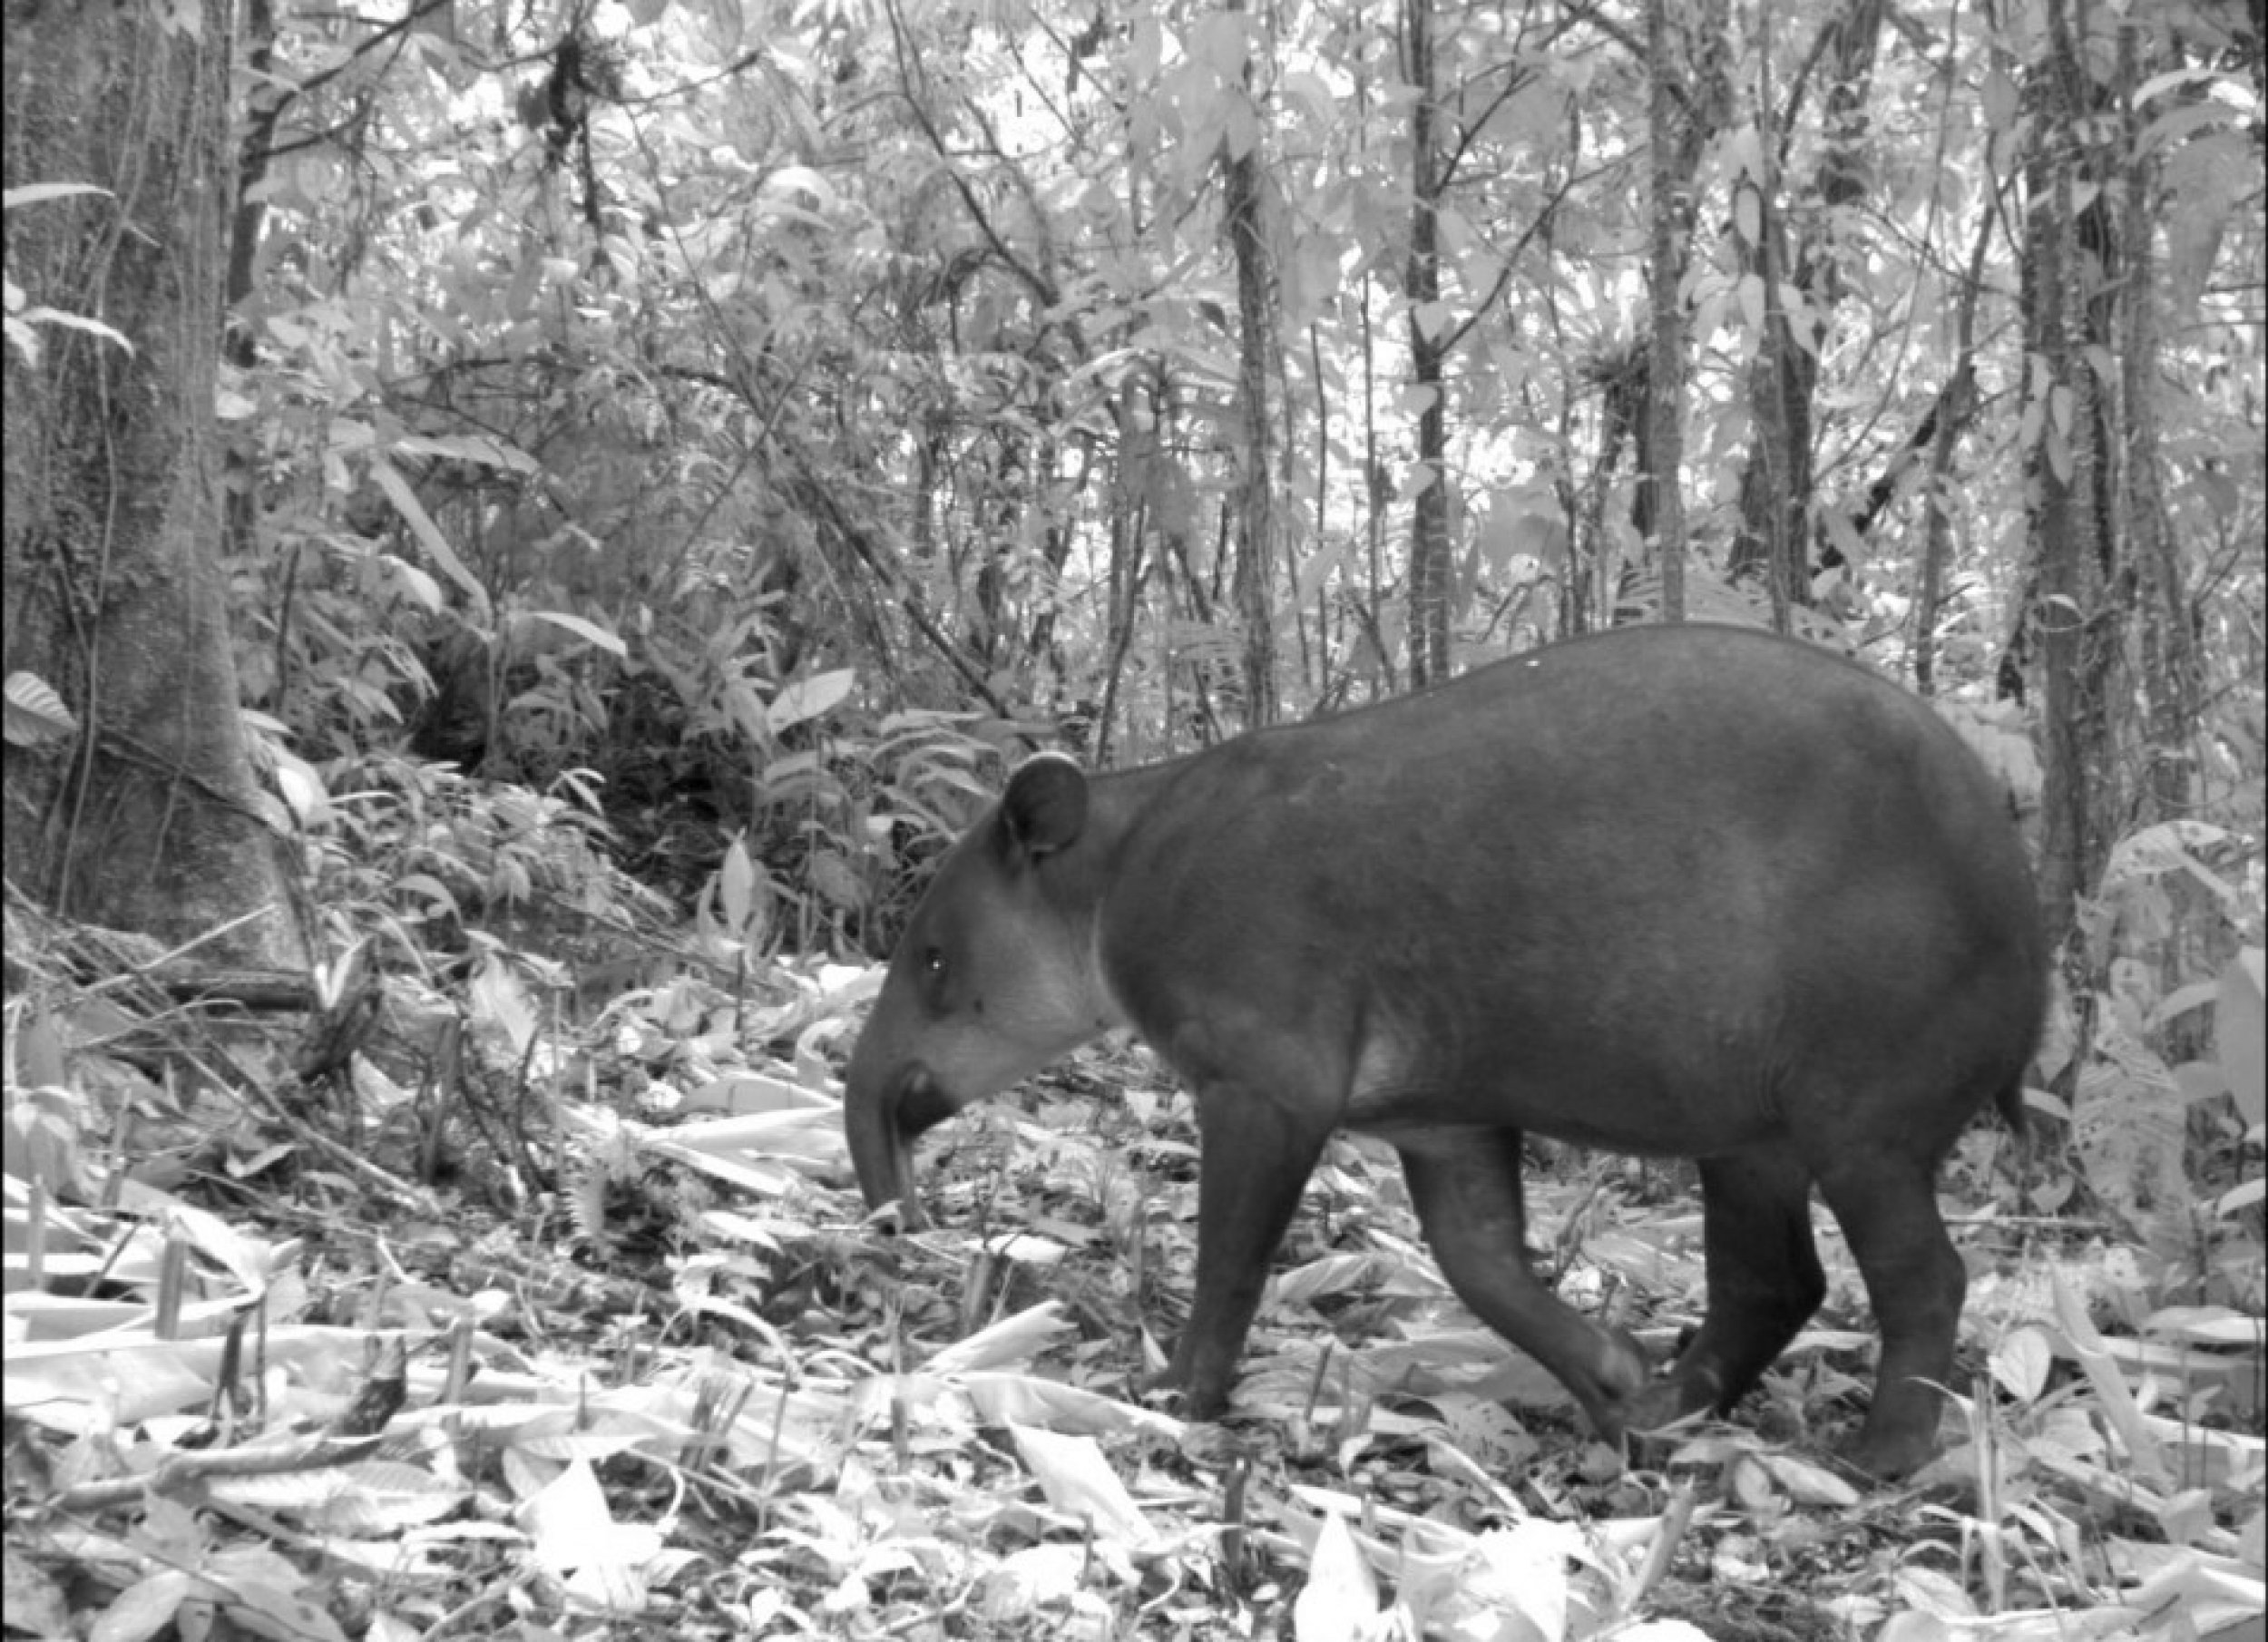 The first global camera-trap study of mammals